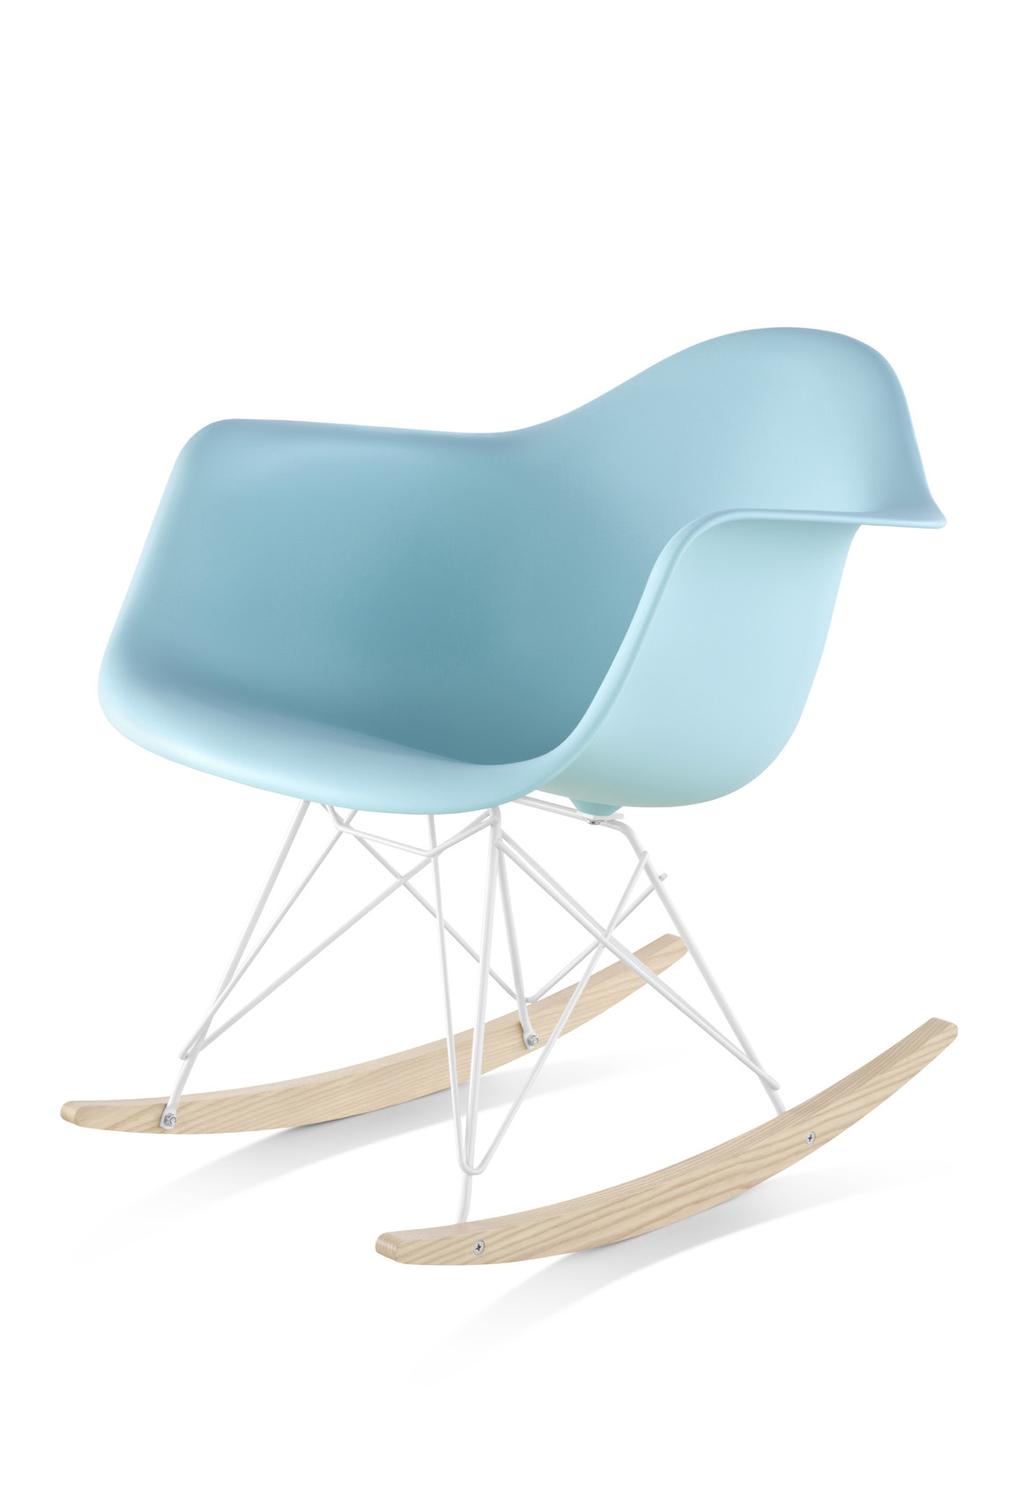 Eames Molded Plastic Armchair Rocker Base Charles Eames said The role of the designer is that of a very good, thoughtful host anticipating the needs of his guests.